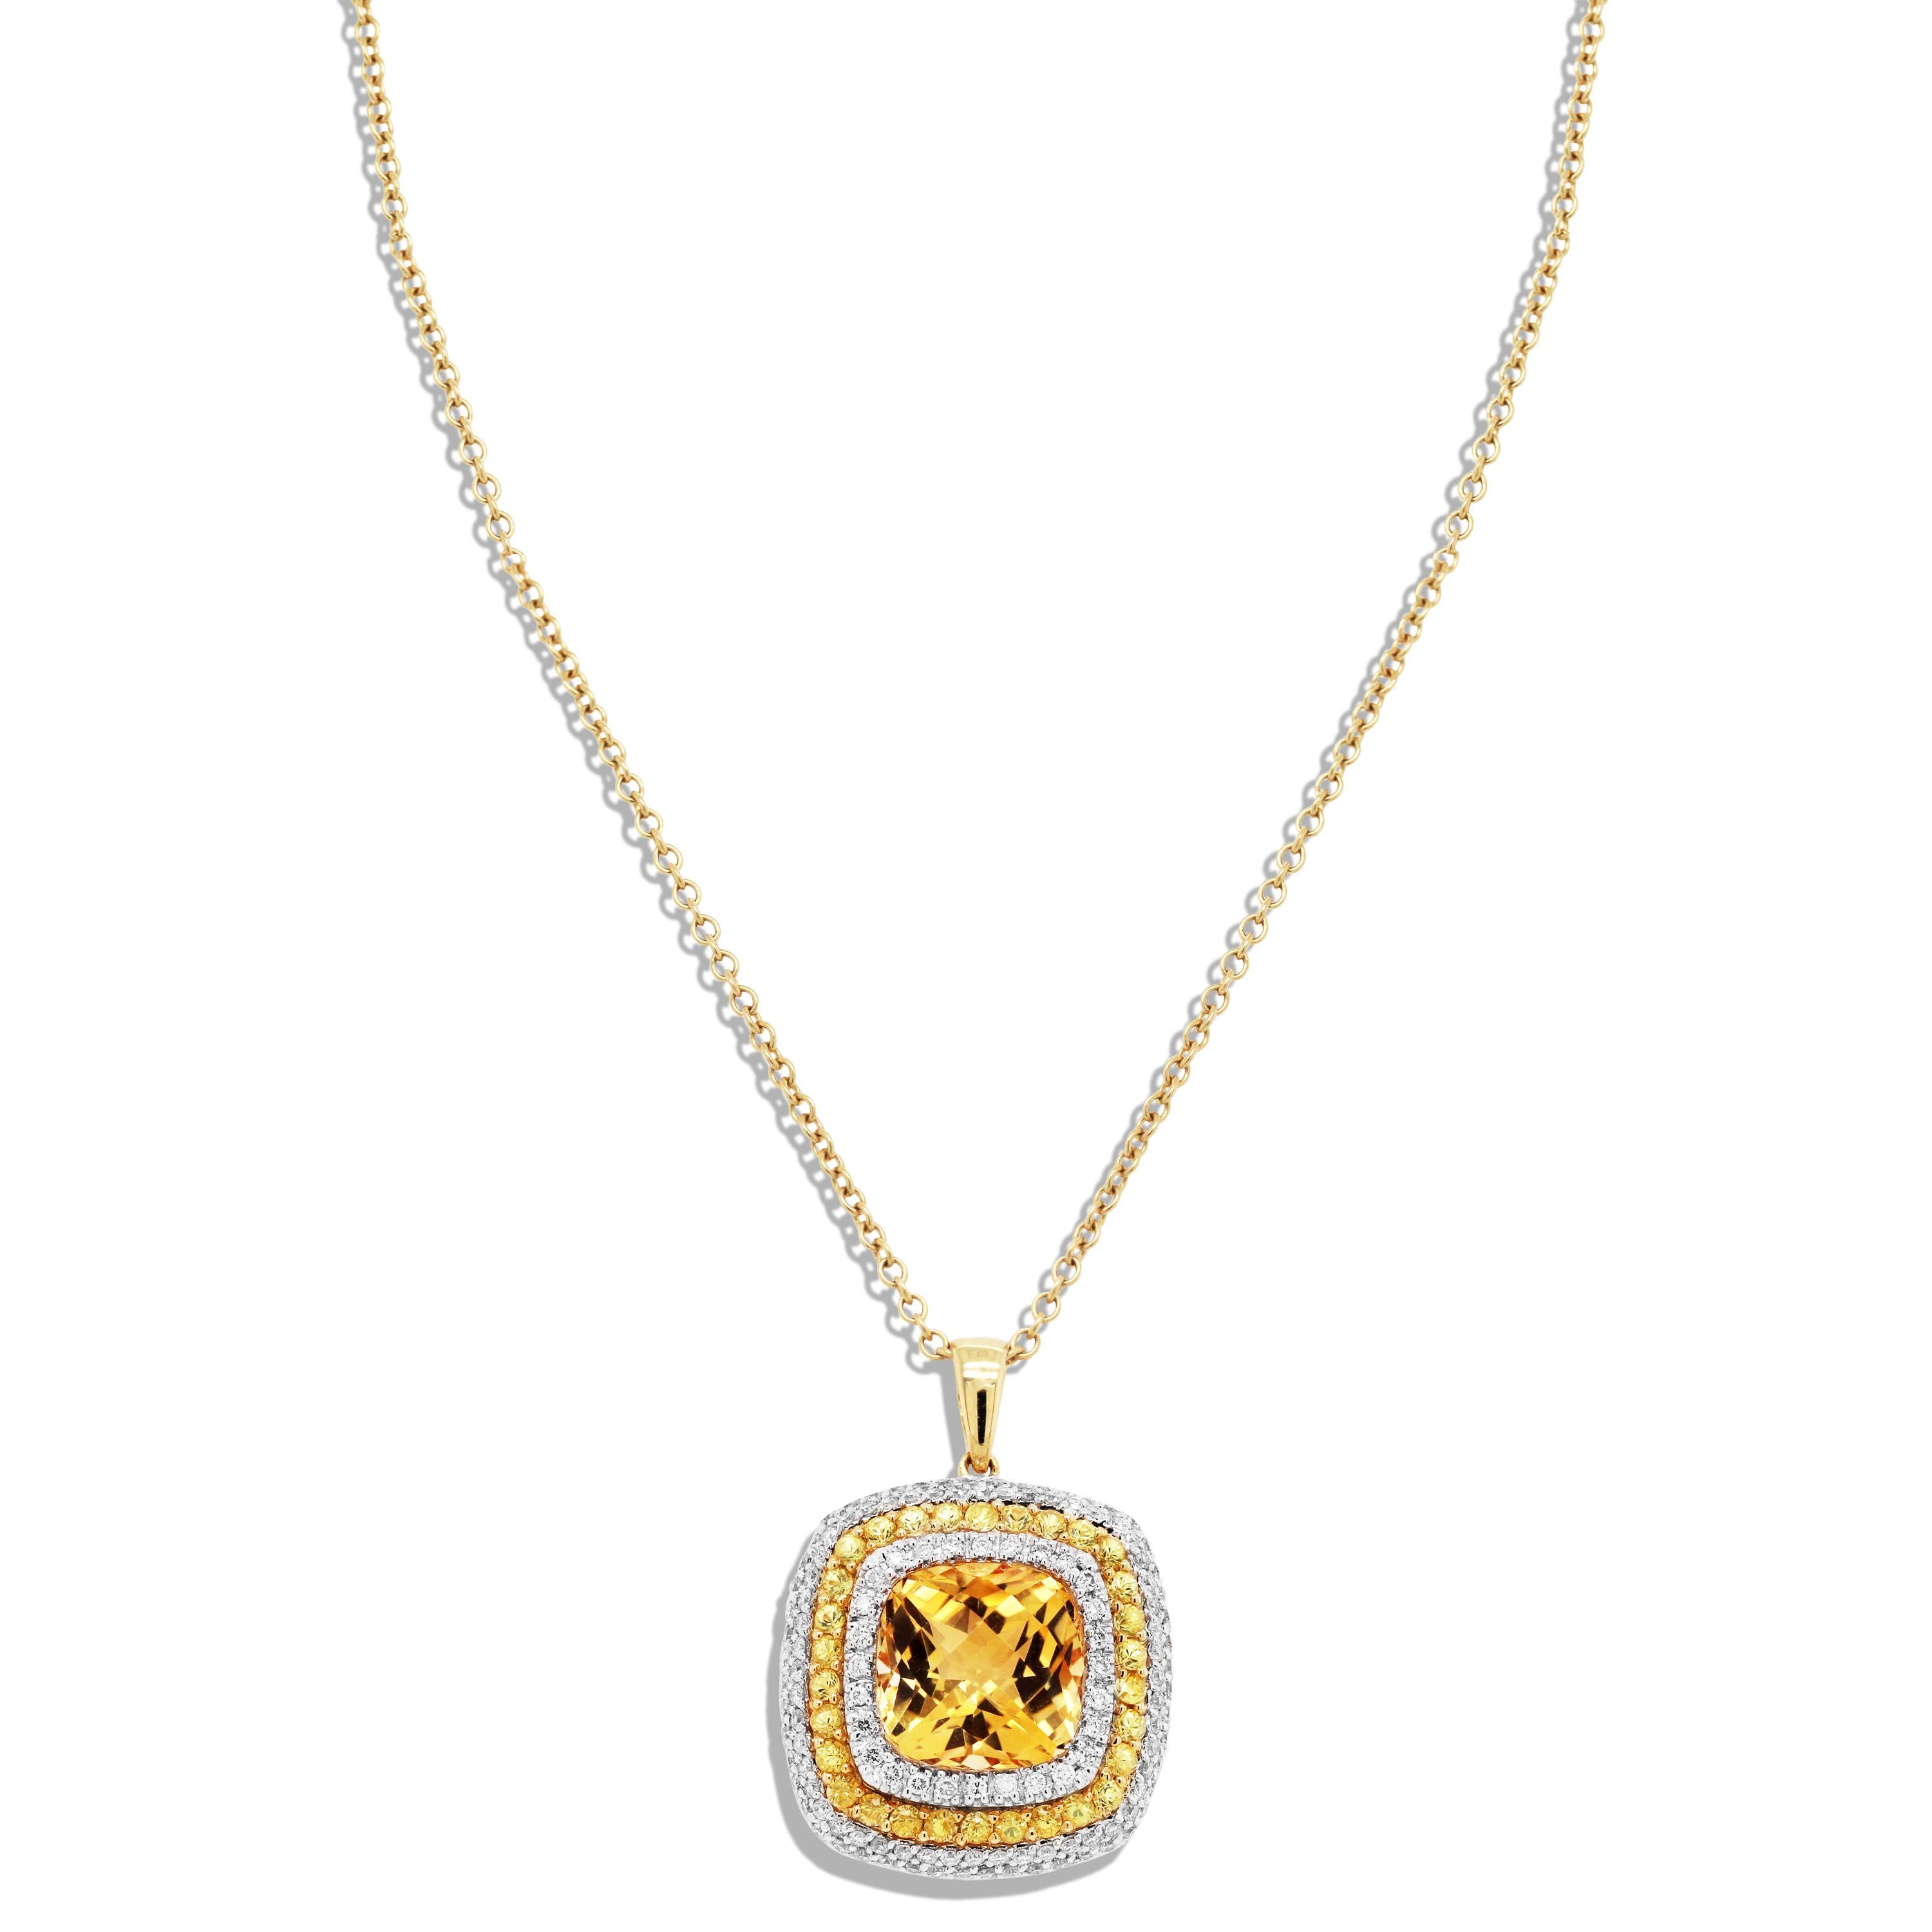 18K Yellow Gold Pendant with Citrine center surrounded by Yellow Sapphires and Diamonds

0.80 carat apprx. diamonds total weight
0.35 carat apprx. yellow sapphires total weight

Apprx. 5 carat Citrine center

Chain is 16 inches in length and uses a